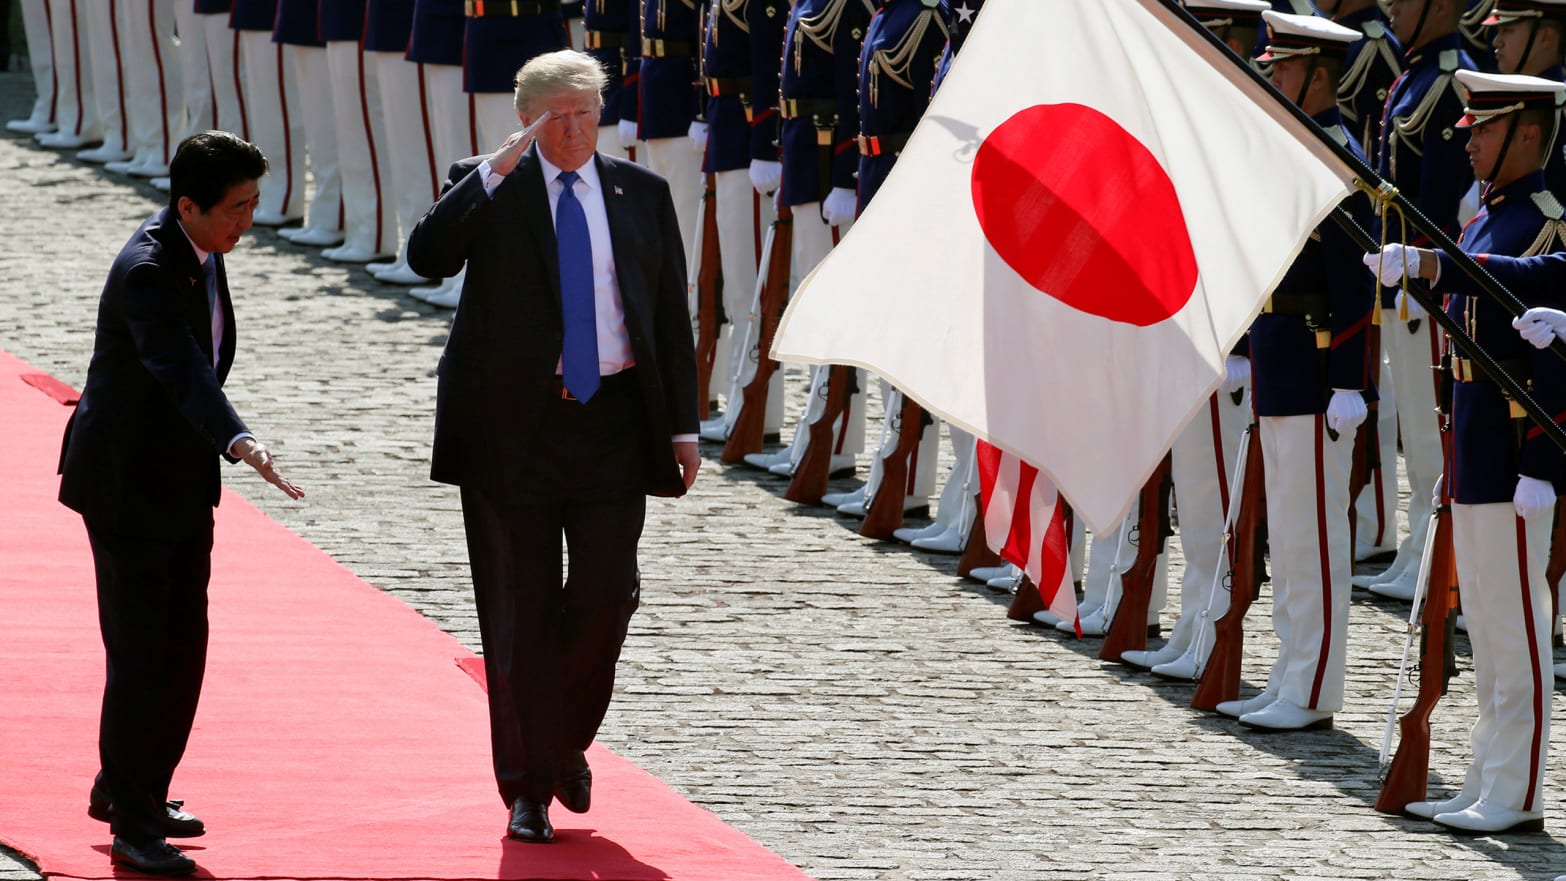 U.S. President Donald Trump reviews an honor guard during a welcome ceremony with Japanese Prime Minister Shinzo Abe at Akasaka State Guest House in Tokyo, Monday, Nov.6, 2017.